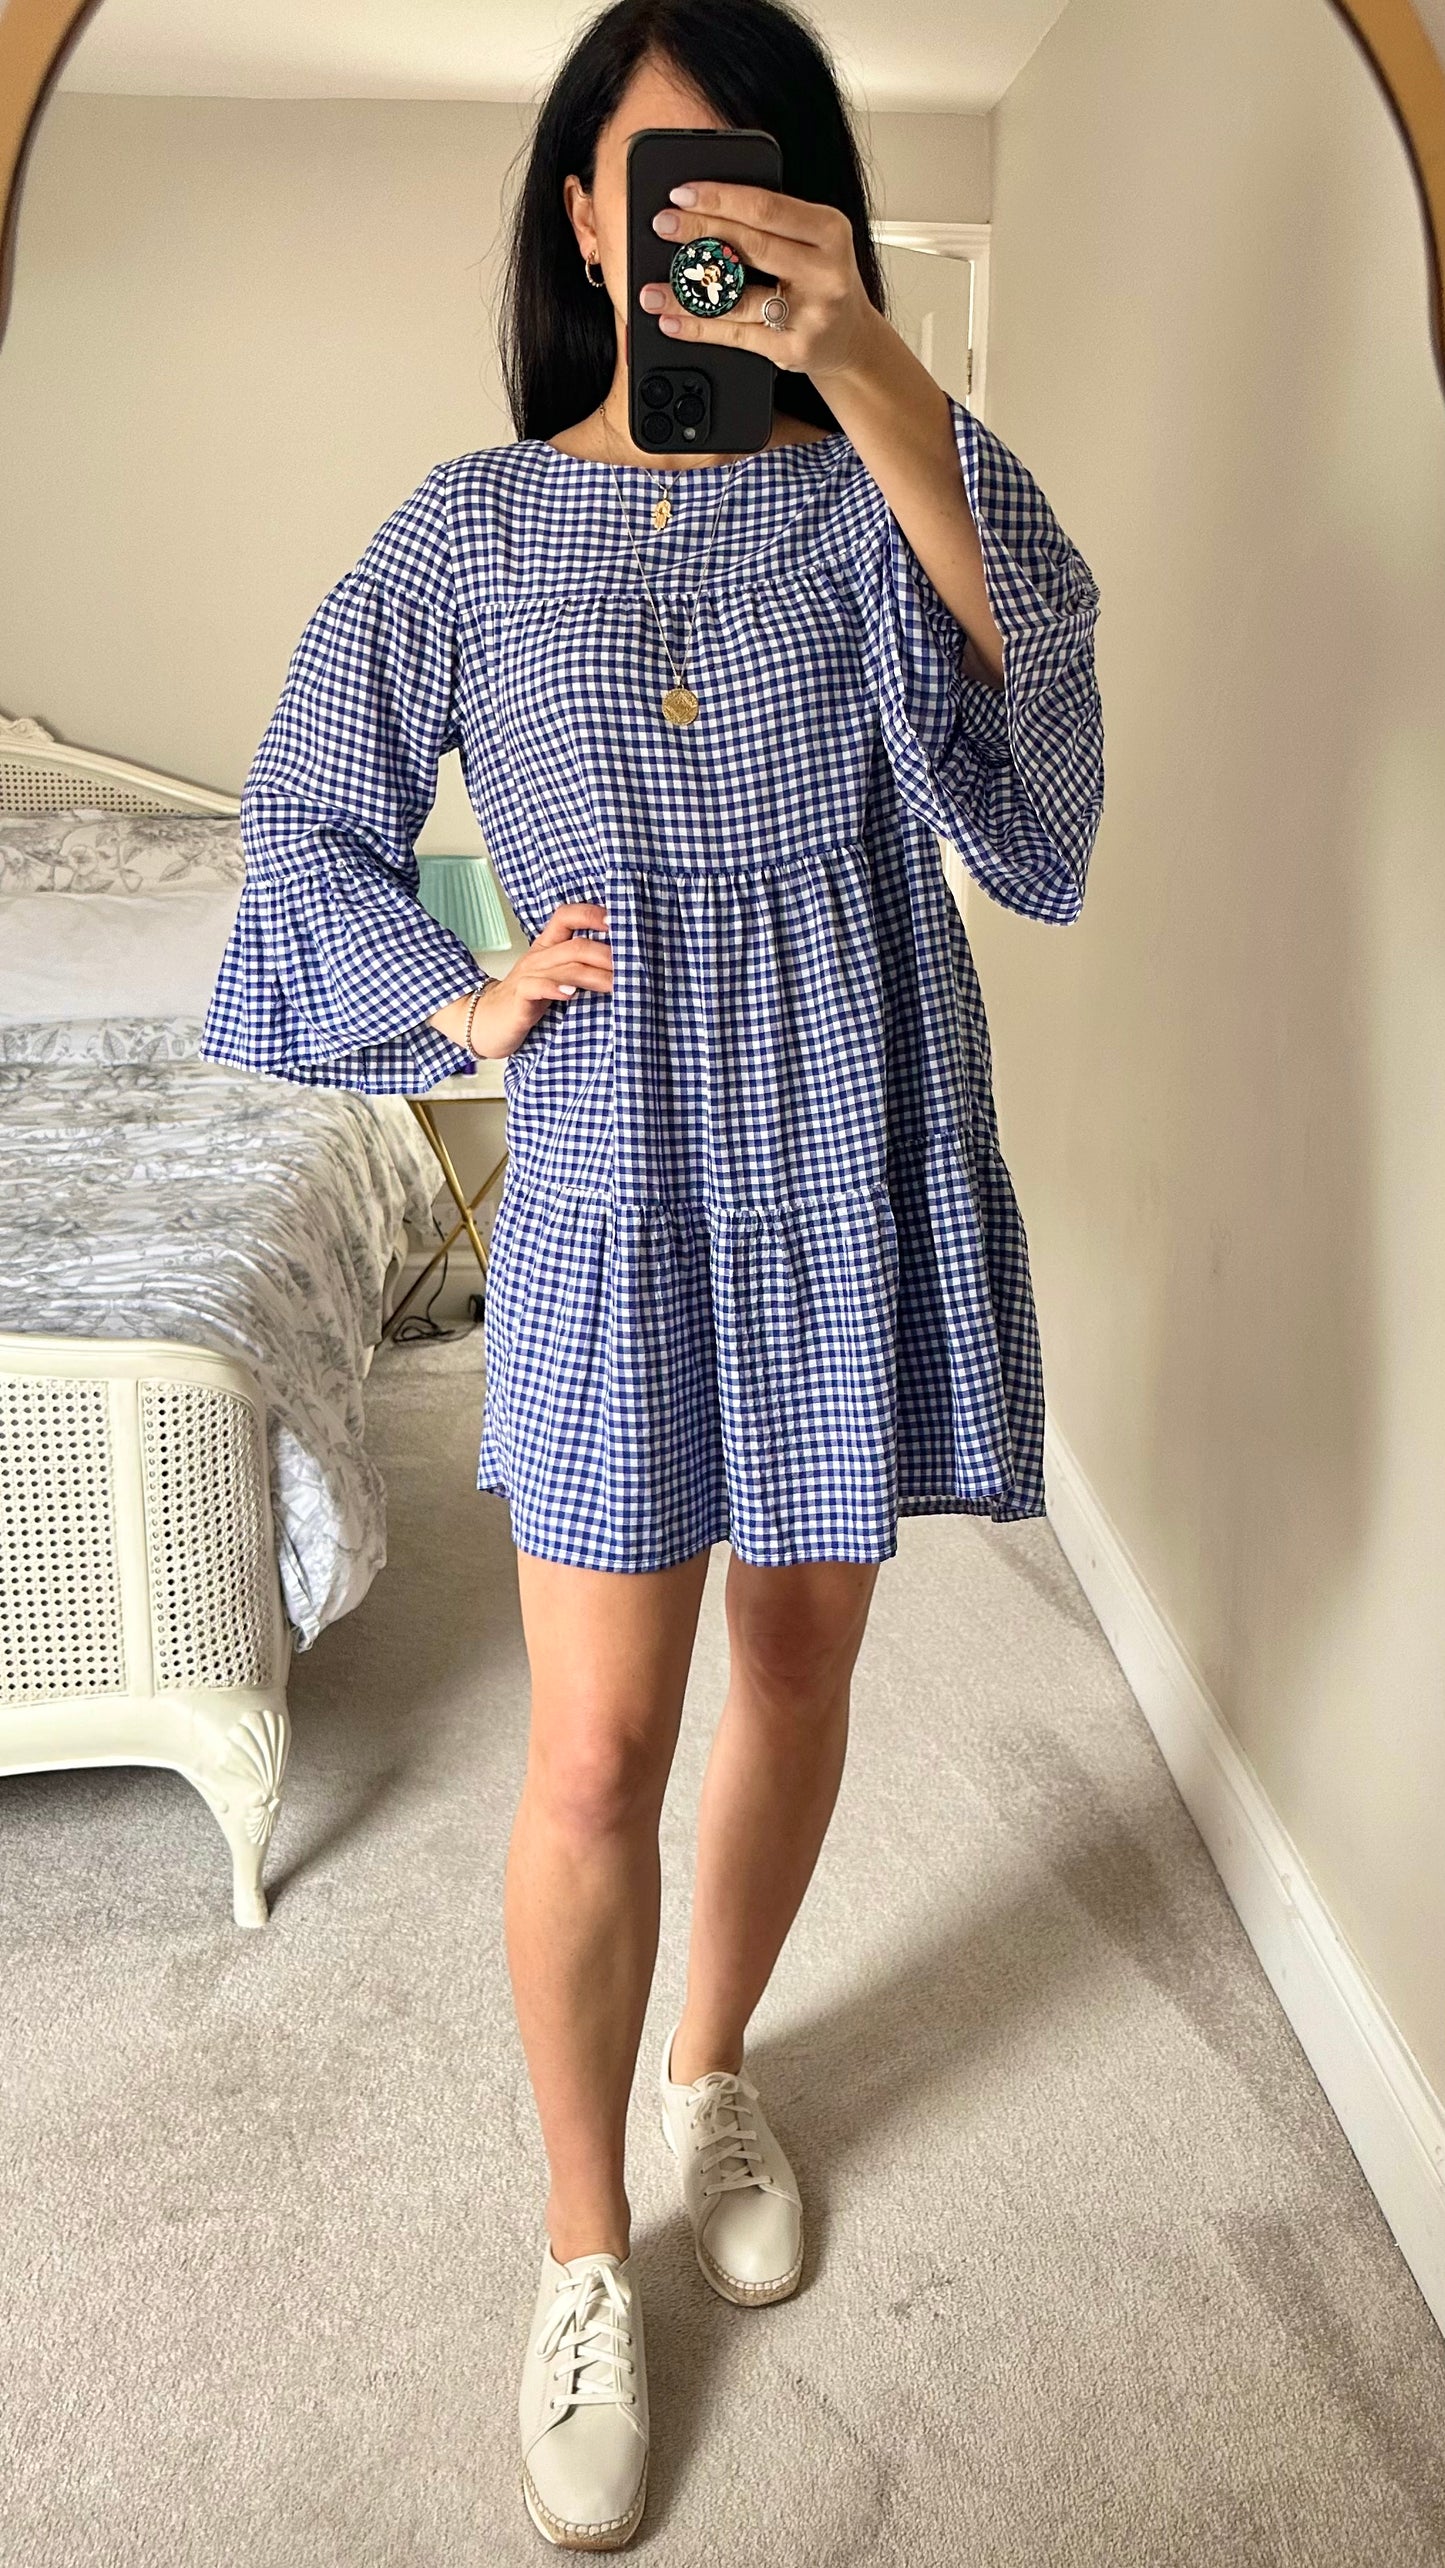 Zara blue white gingham tiered mid length casual dress small UK 6-8-10 vgc